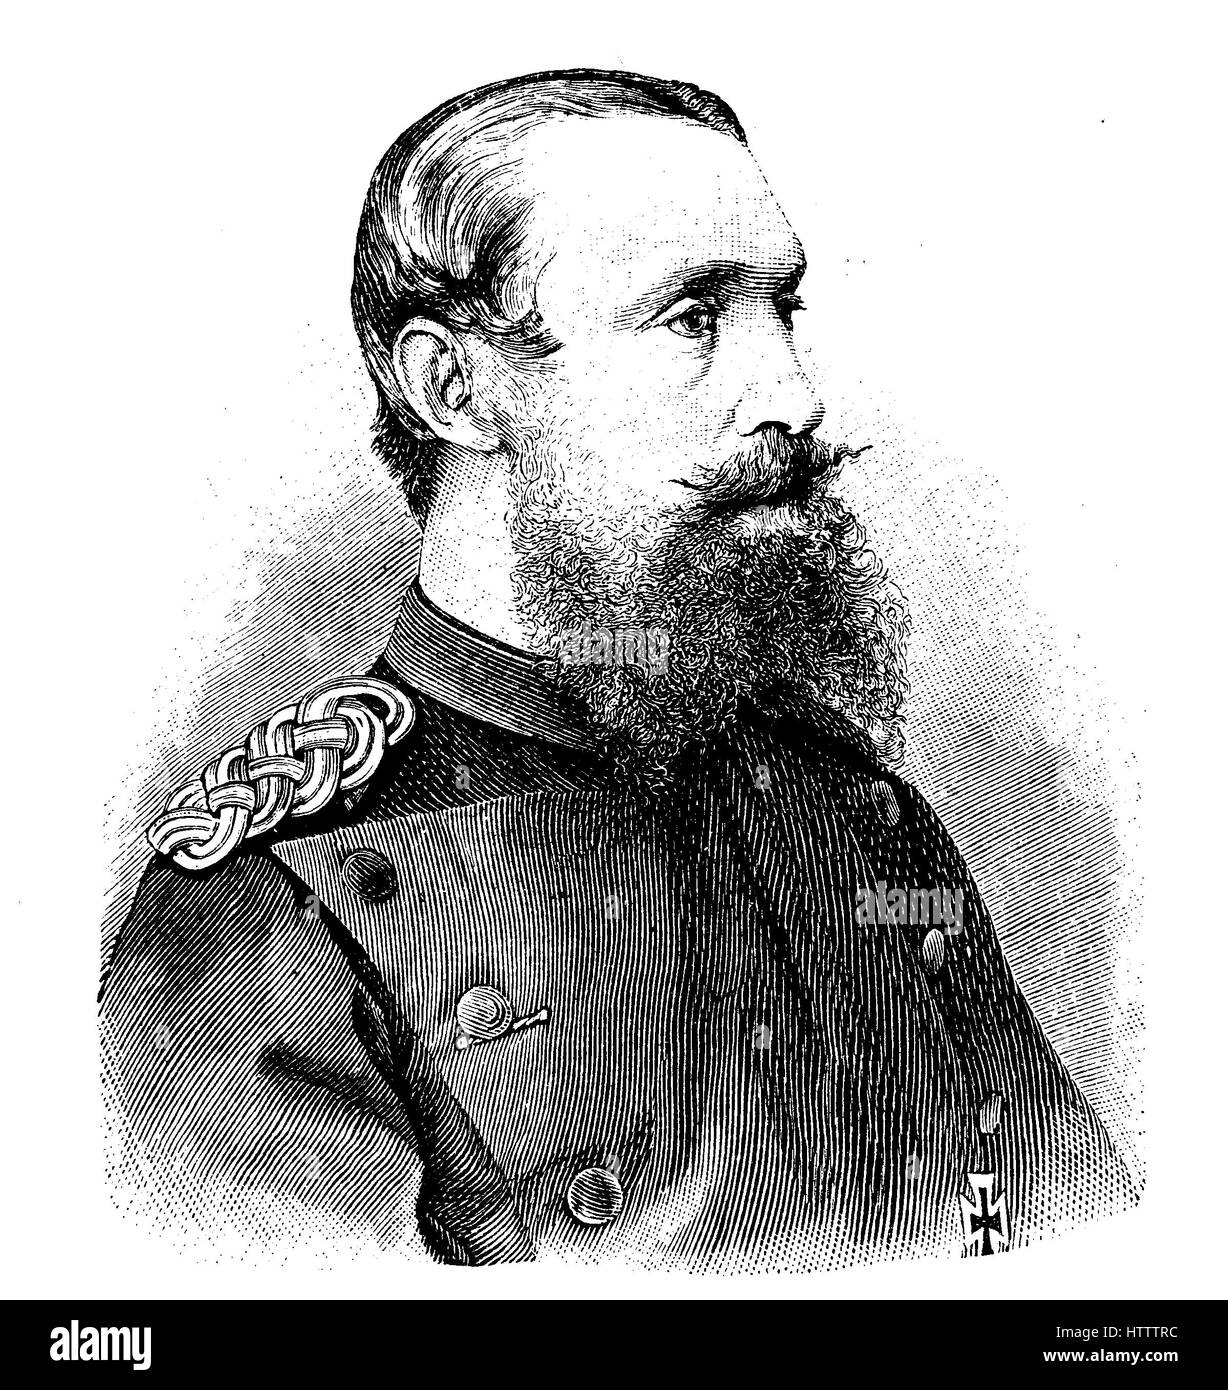 Military people of Germany in the Franco-Prussian War 1870 - 1871, Hermann Ernst Franz Bernhard, Fürst zu Hohenlohe-Langenburg, 31 August 1832 - 9 March 1913, was the 6th Prince of Hohenlohe-Langenburg, reproduction of a woodcut from 1882, digital improved Stock Photo